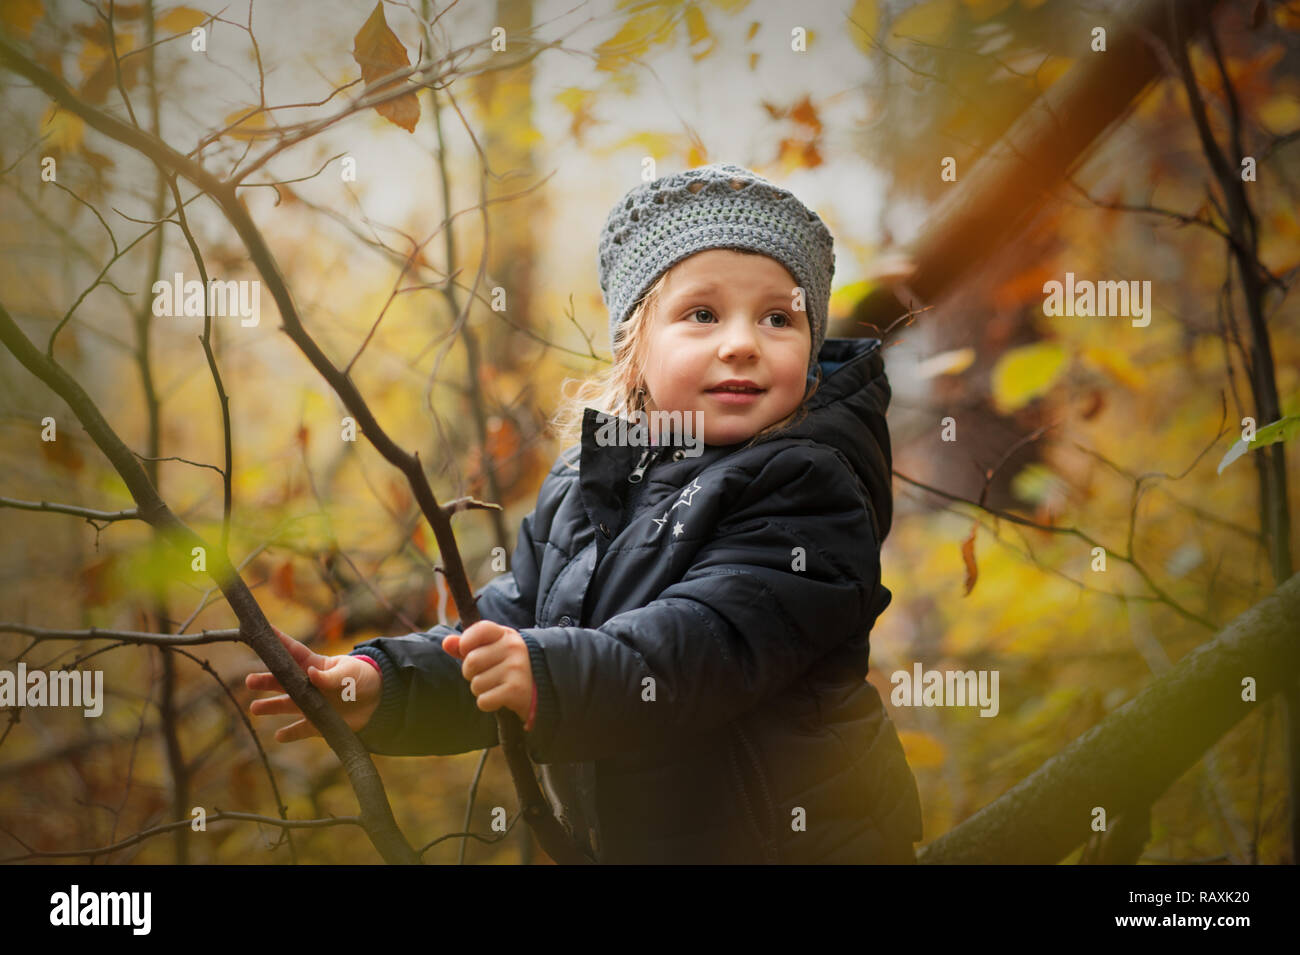 an autumn portrait of young girl in nature Stock Photo